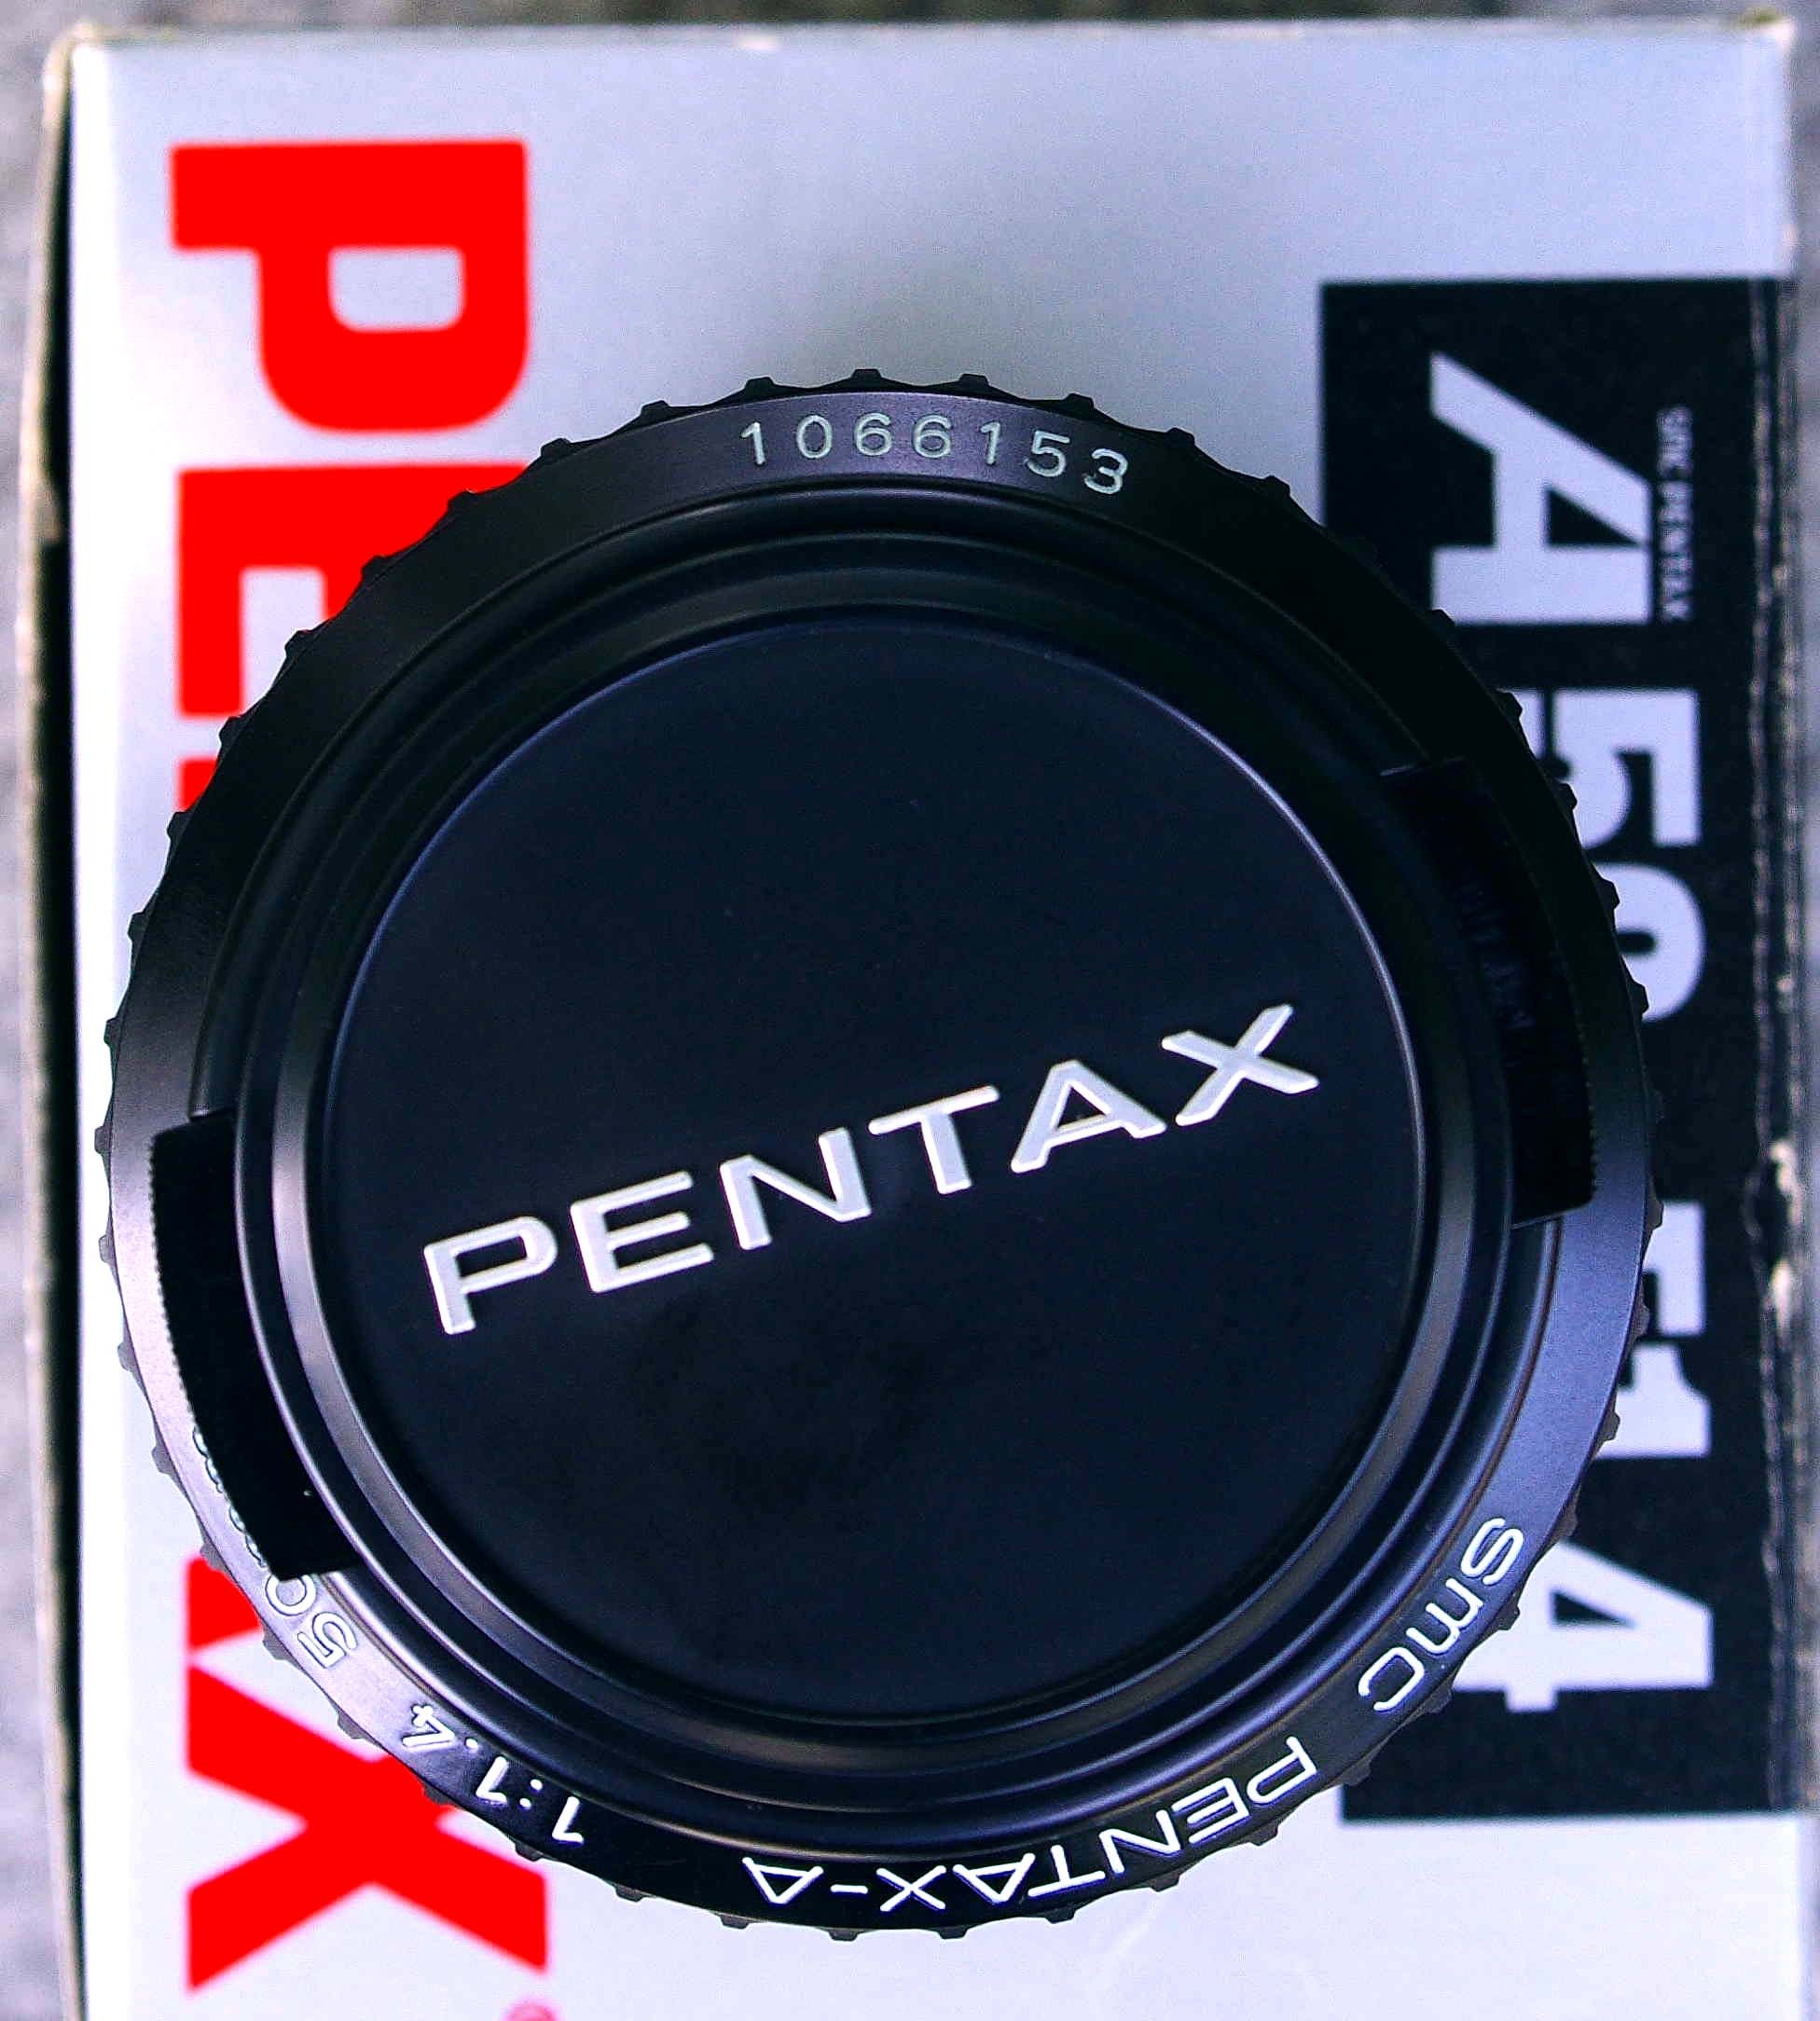  Pentax A50/1.4, brand new with packaging